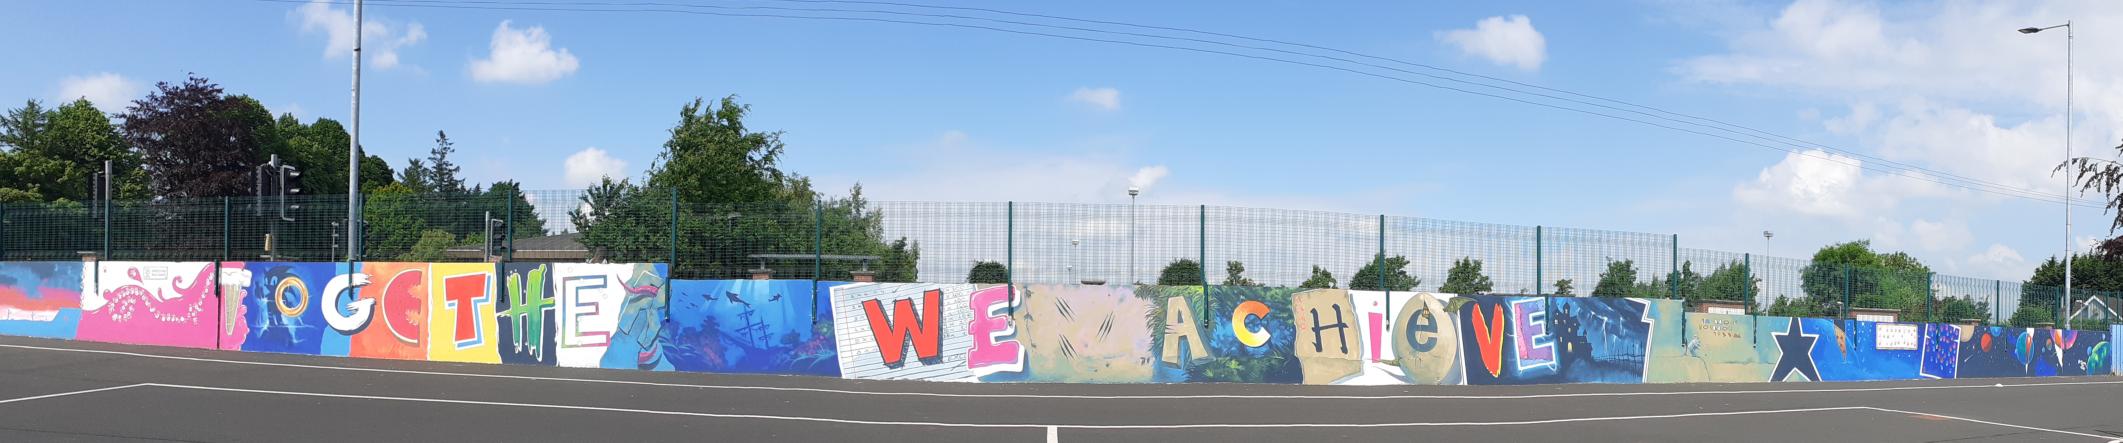 Barry achieves greatness with new mural at Strabane school